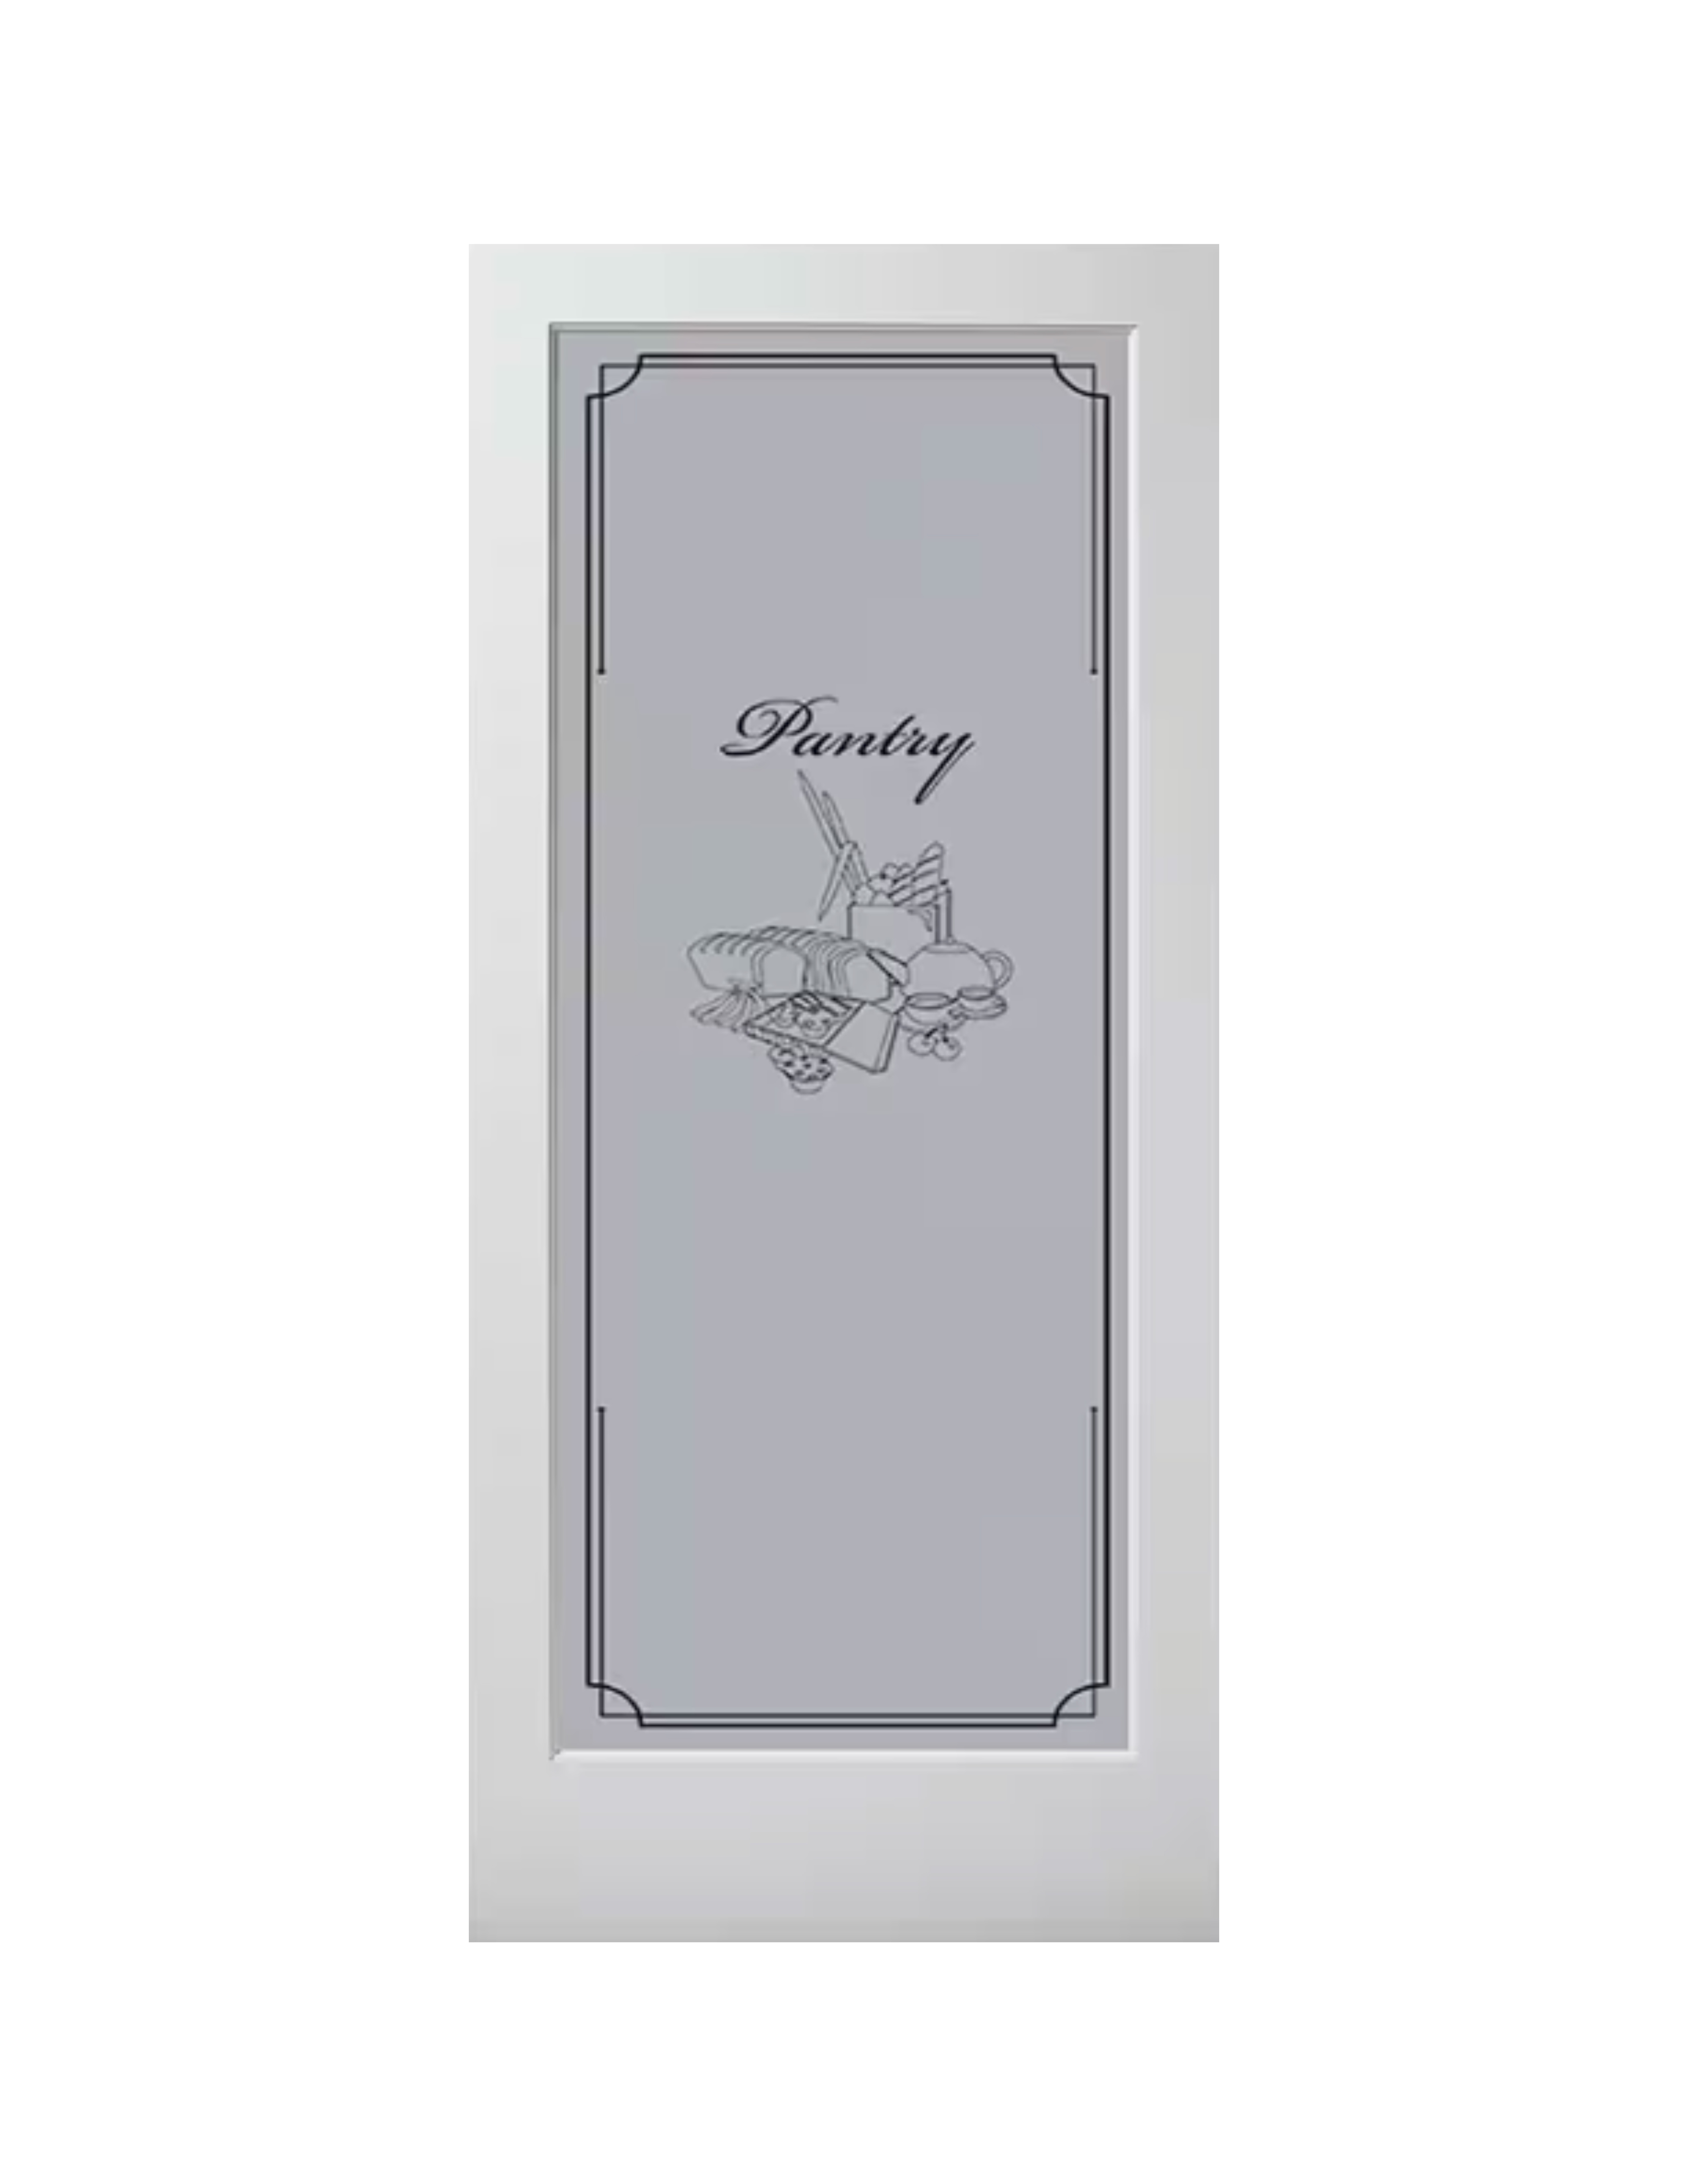 Interior Frosted Pantry Door – Only available in certain models (upgrade)